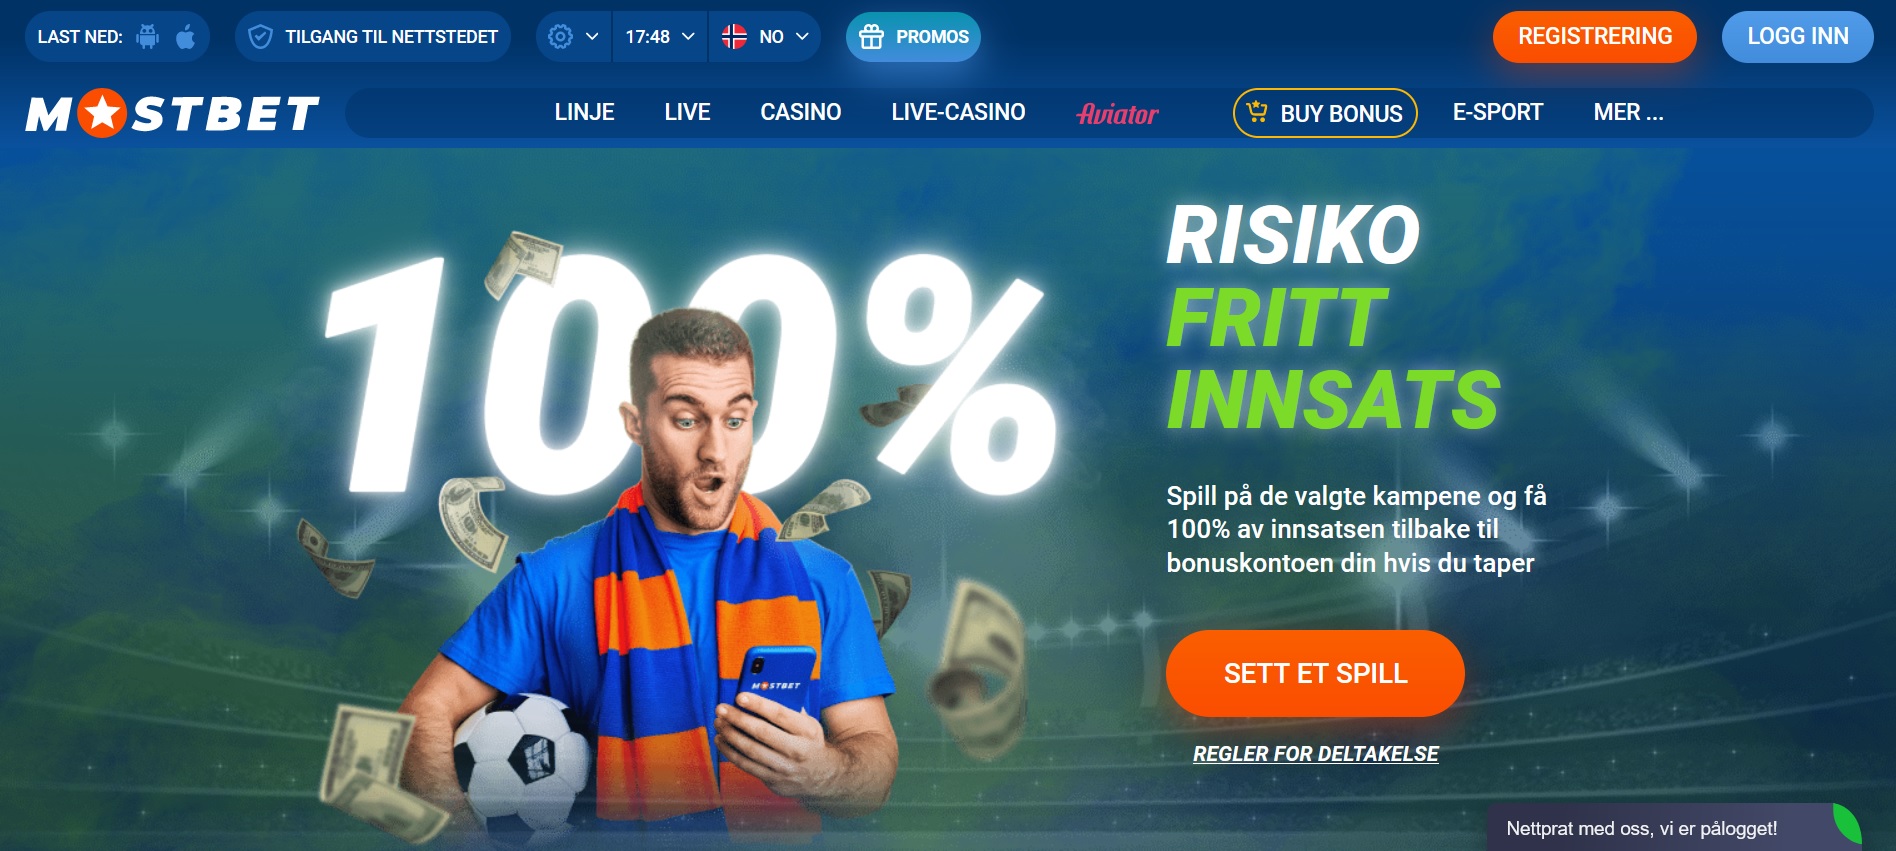 3 Short Stories You Didn't Know About Betting company Mostbet in the Czech Republic